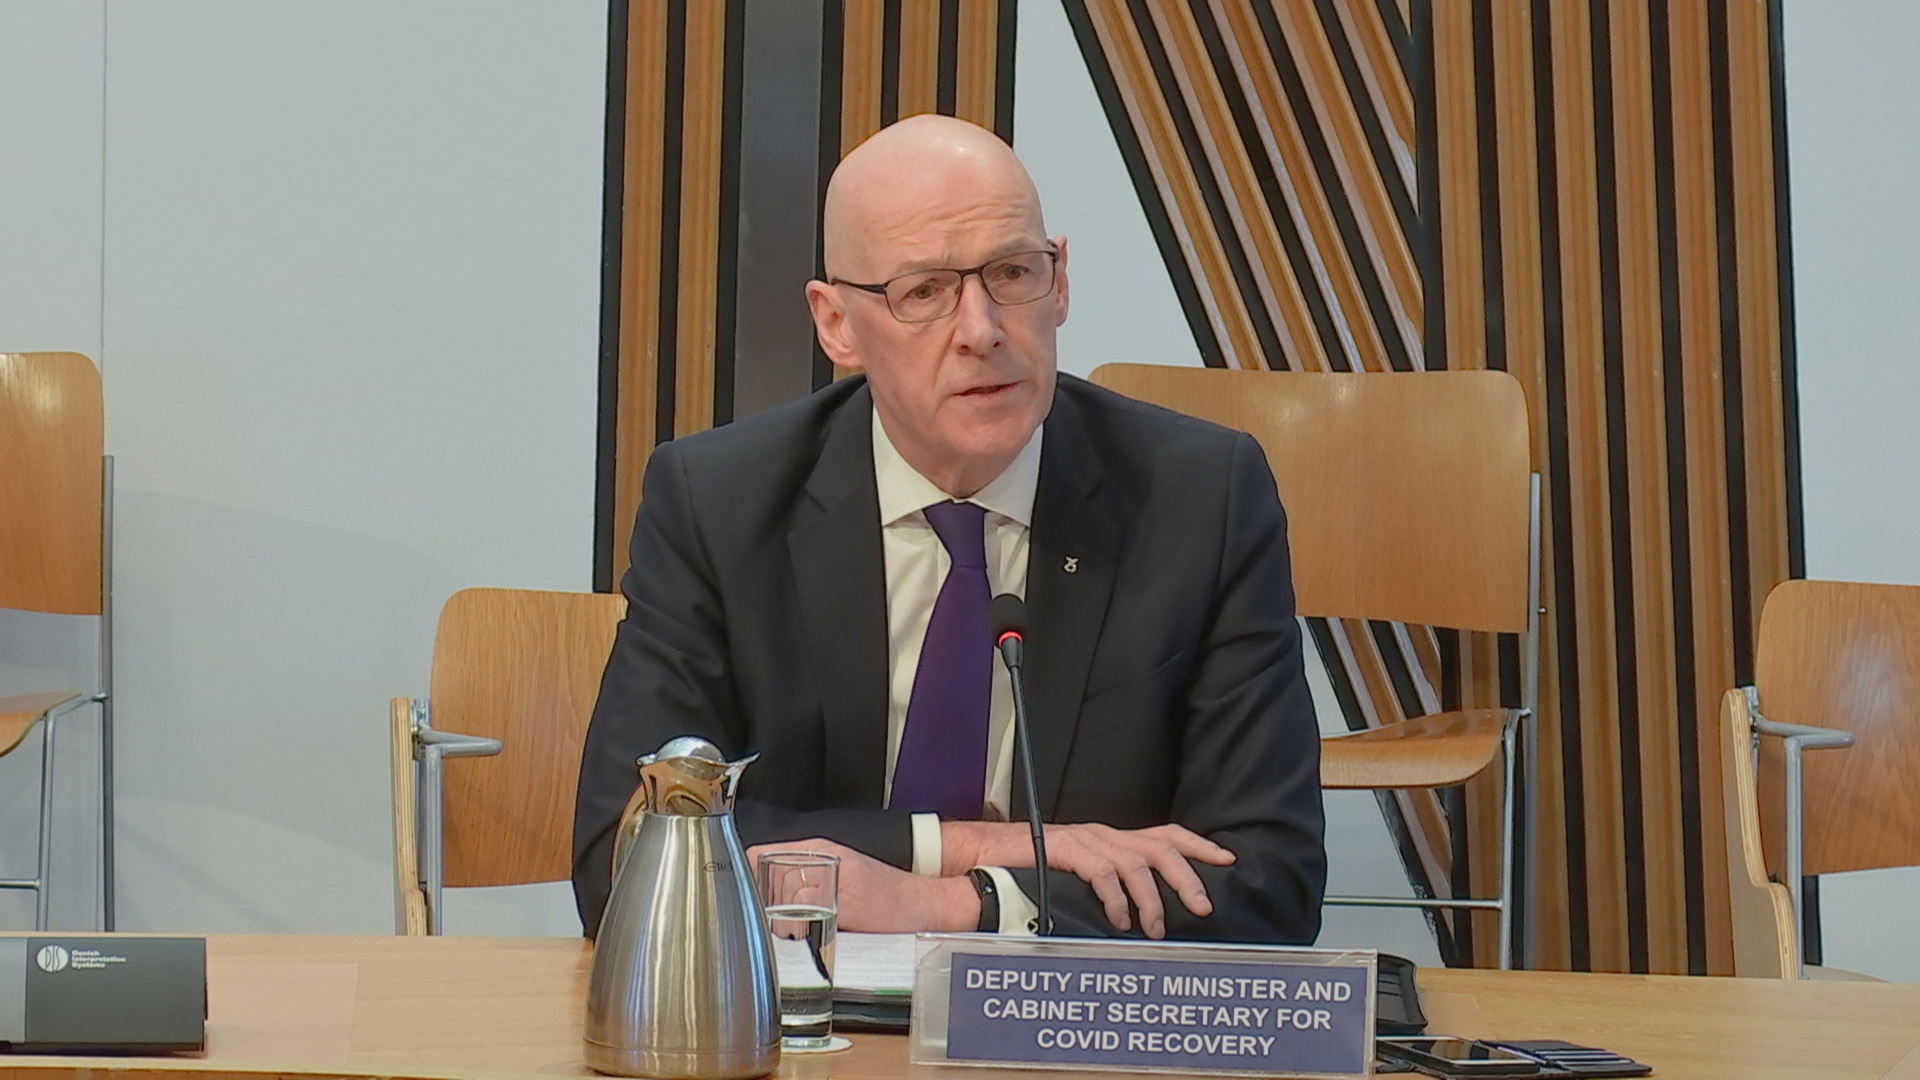 The deputy first minister was giving evidence at Holyrood. (Scottish Parliament TV)